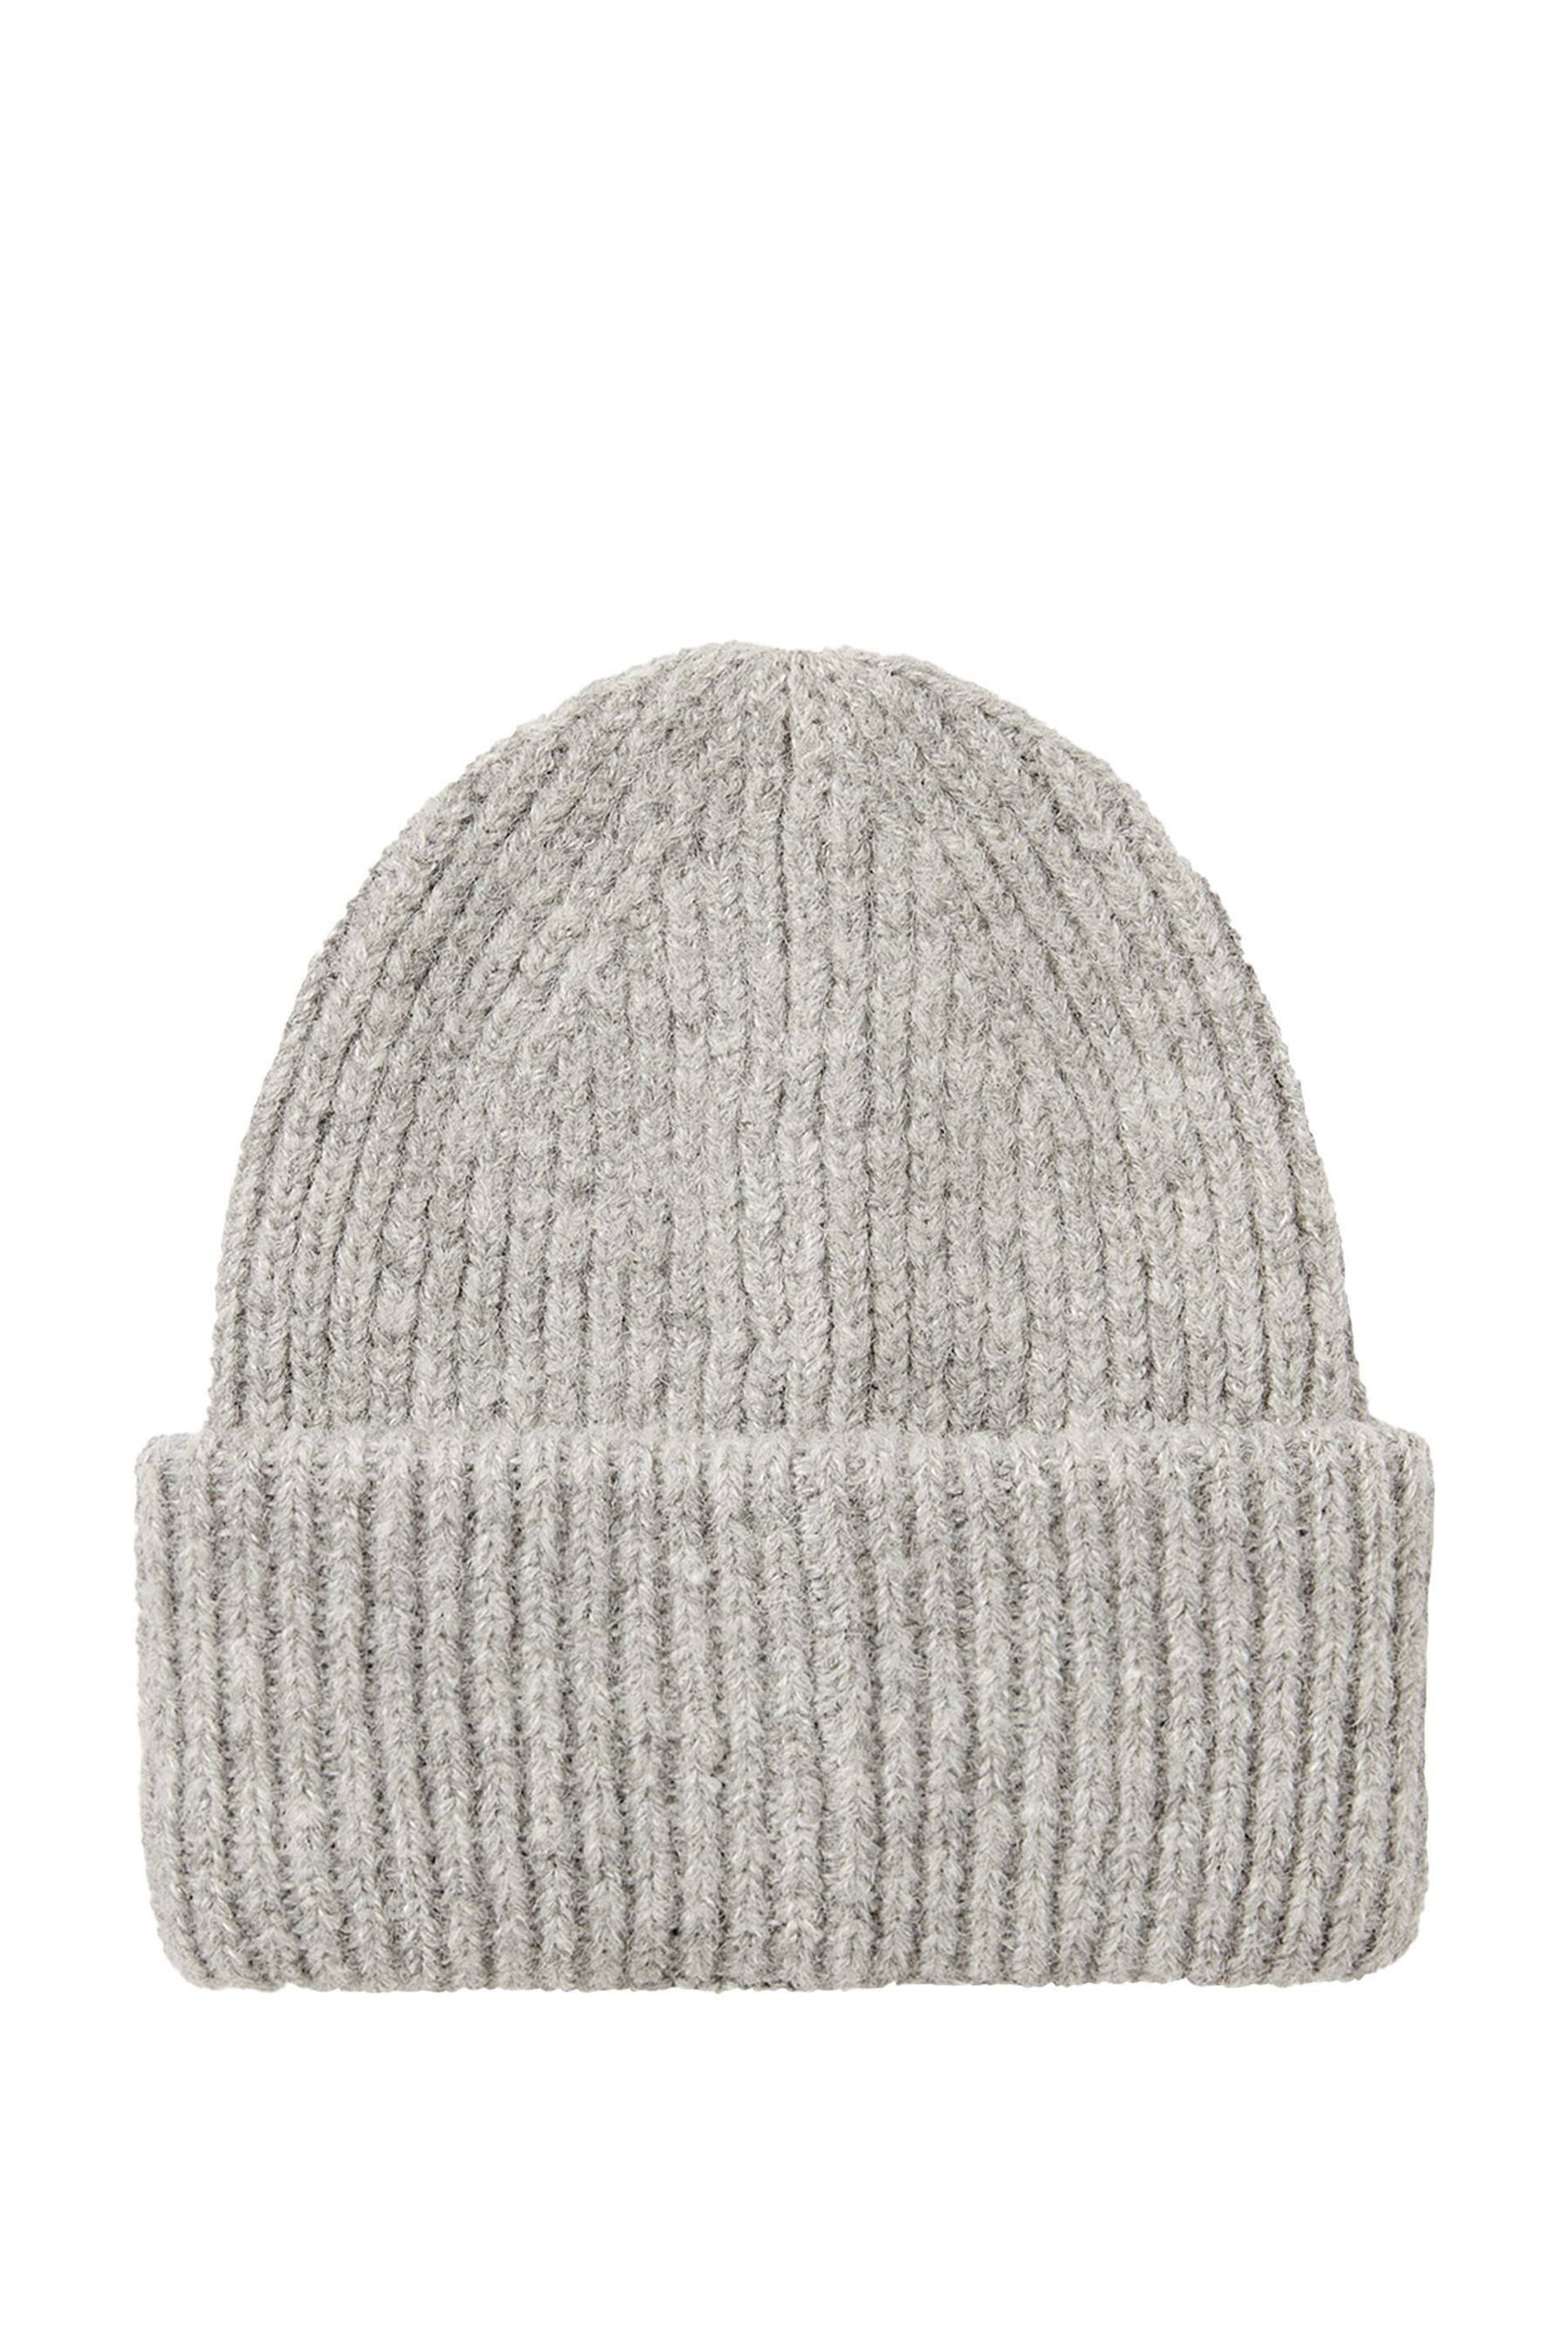 Joules Eloise Grey Marl Oversized Knitted Beanie Hat - Image 4 of 5